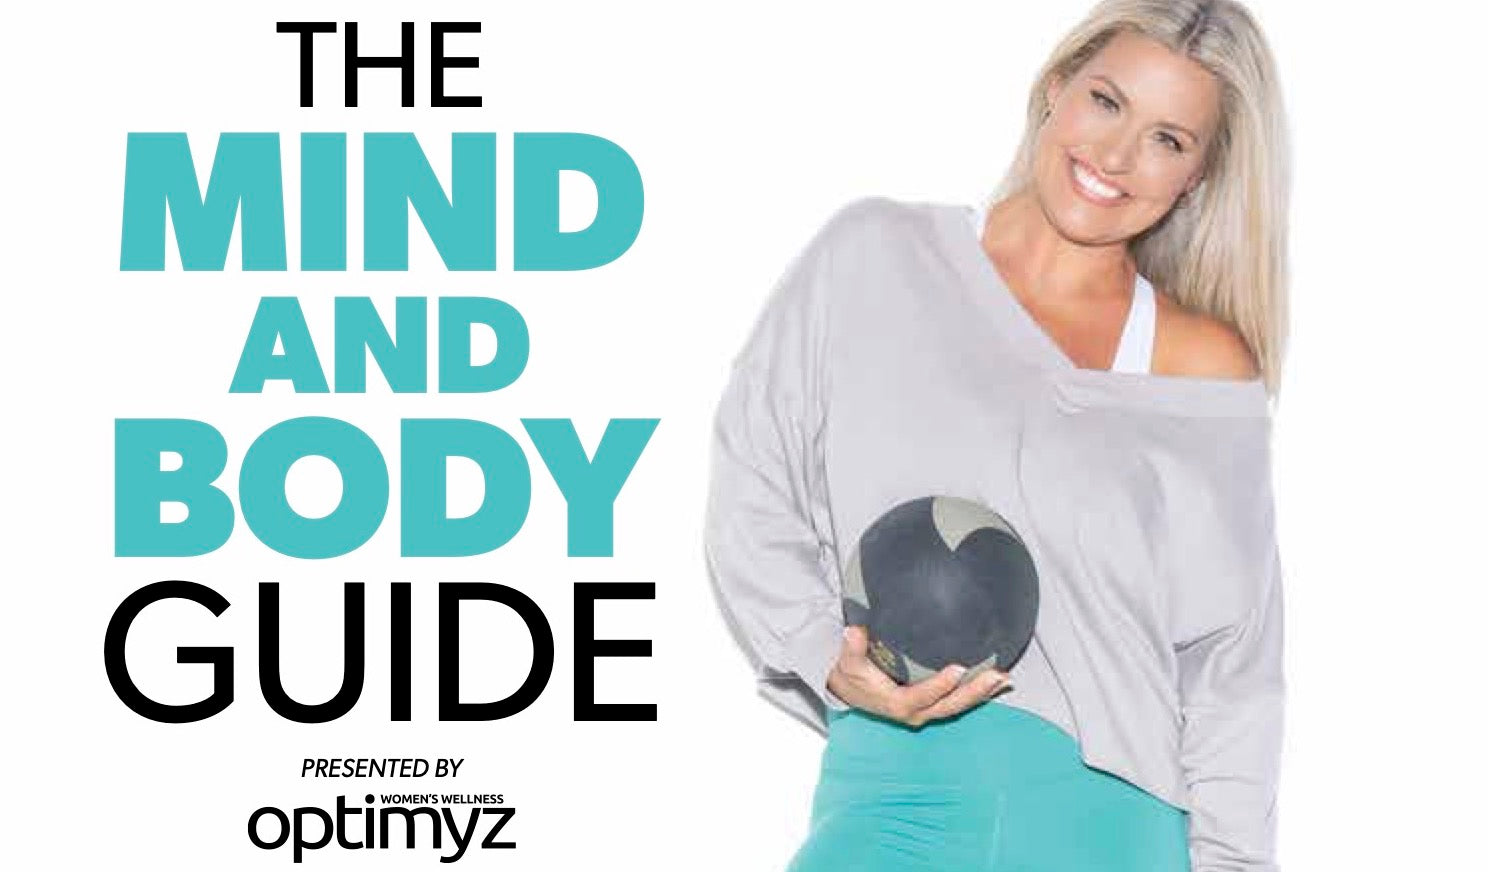 Introducing the Lebert HIIT System in The Mind And Body Guide by Optimyz